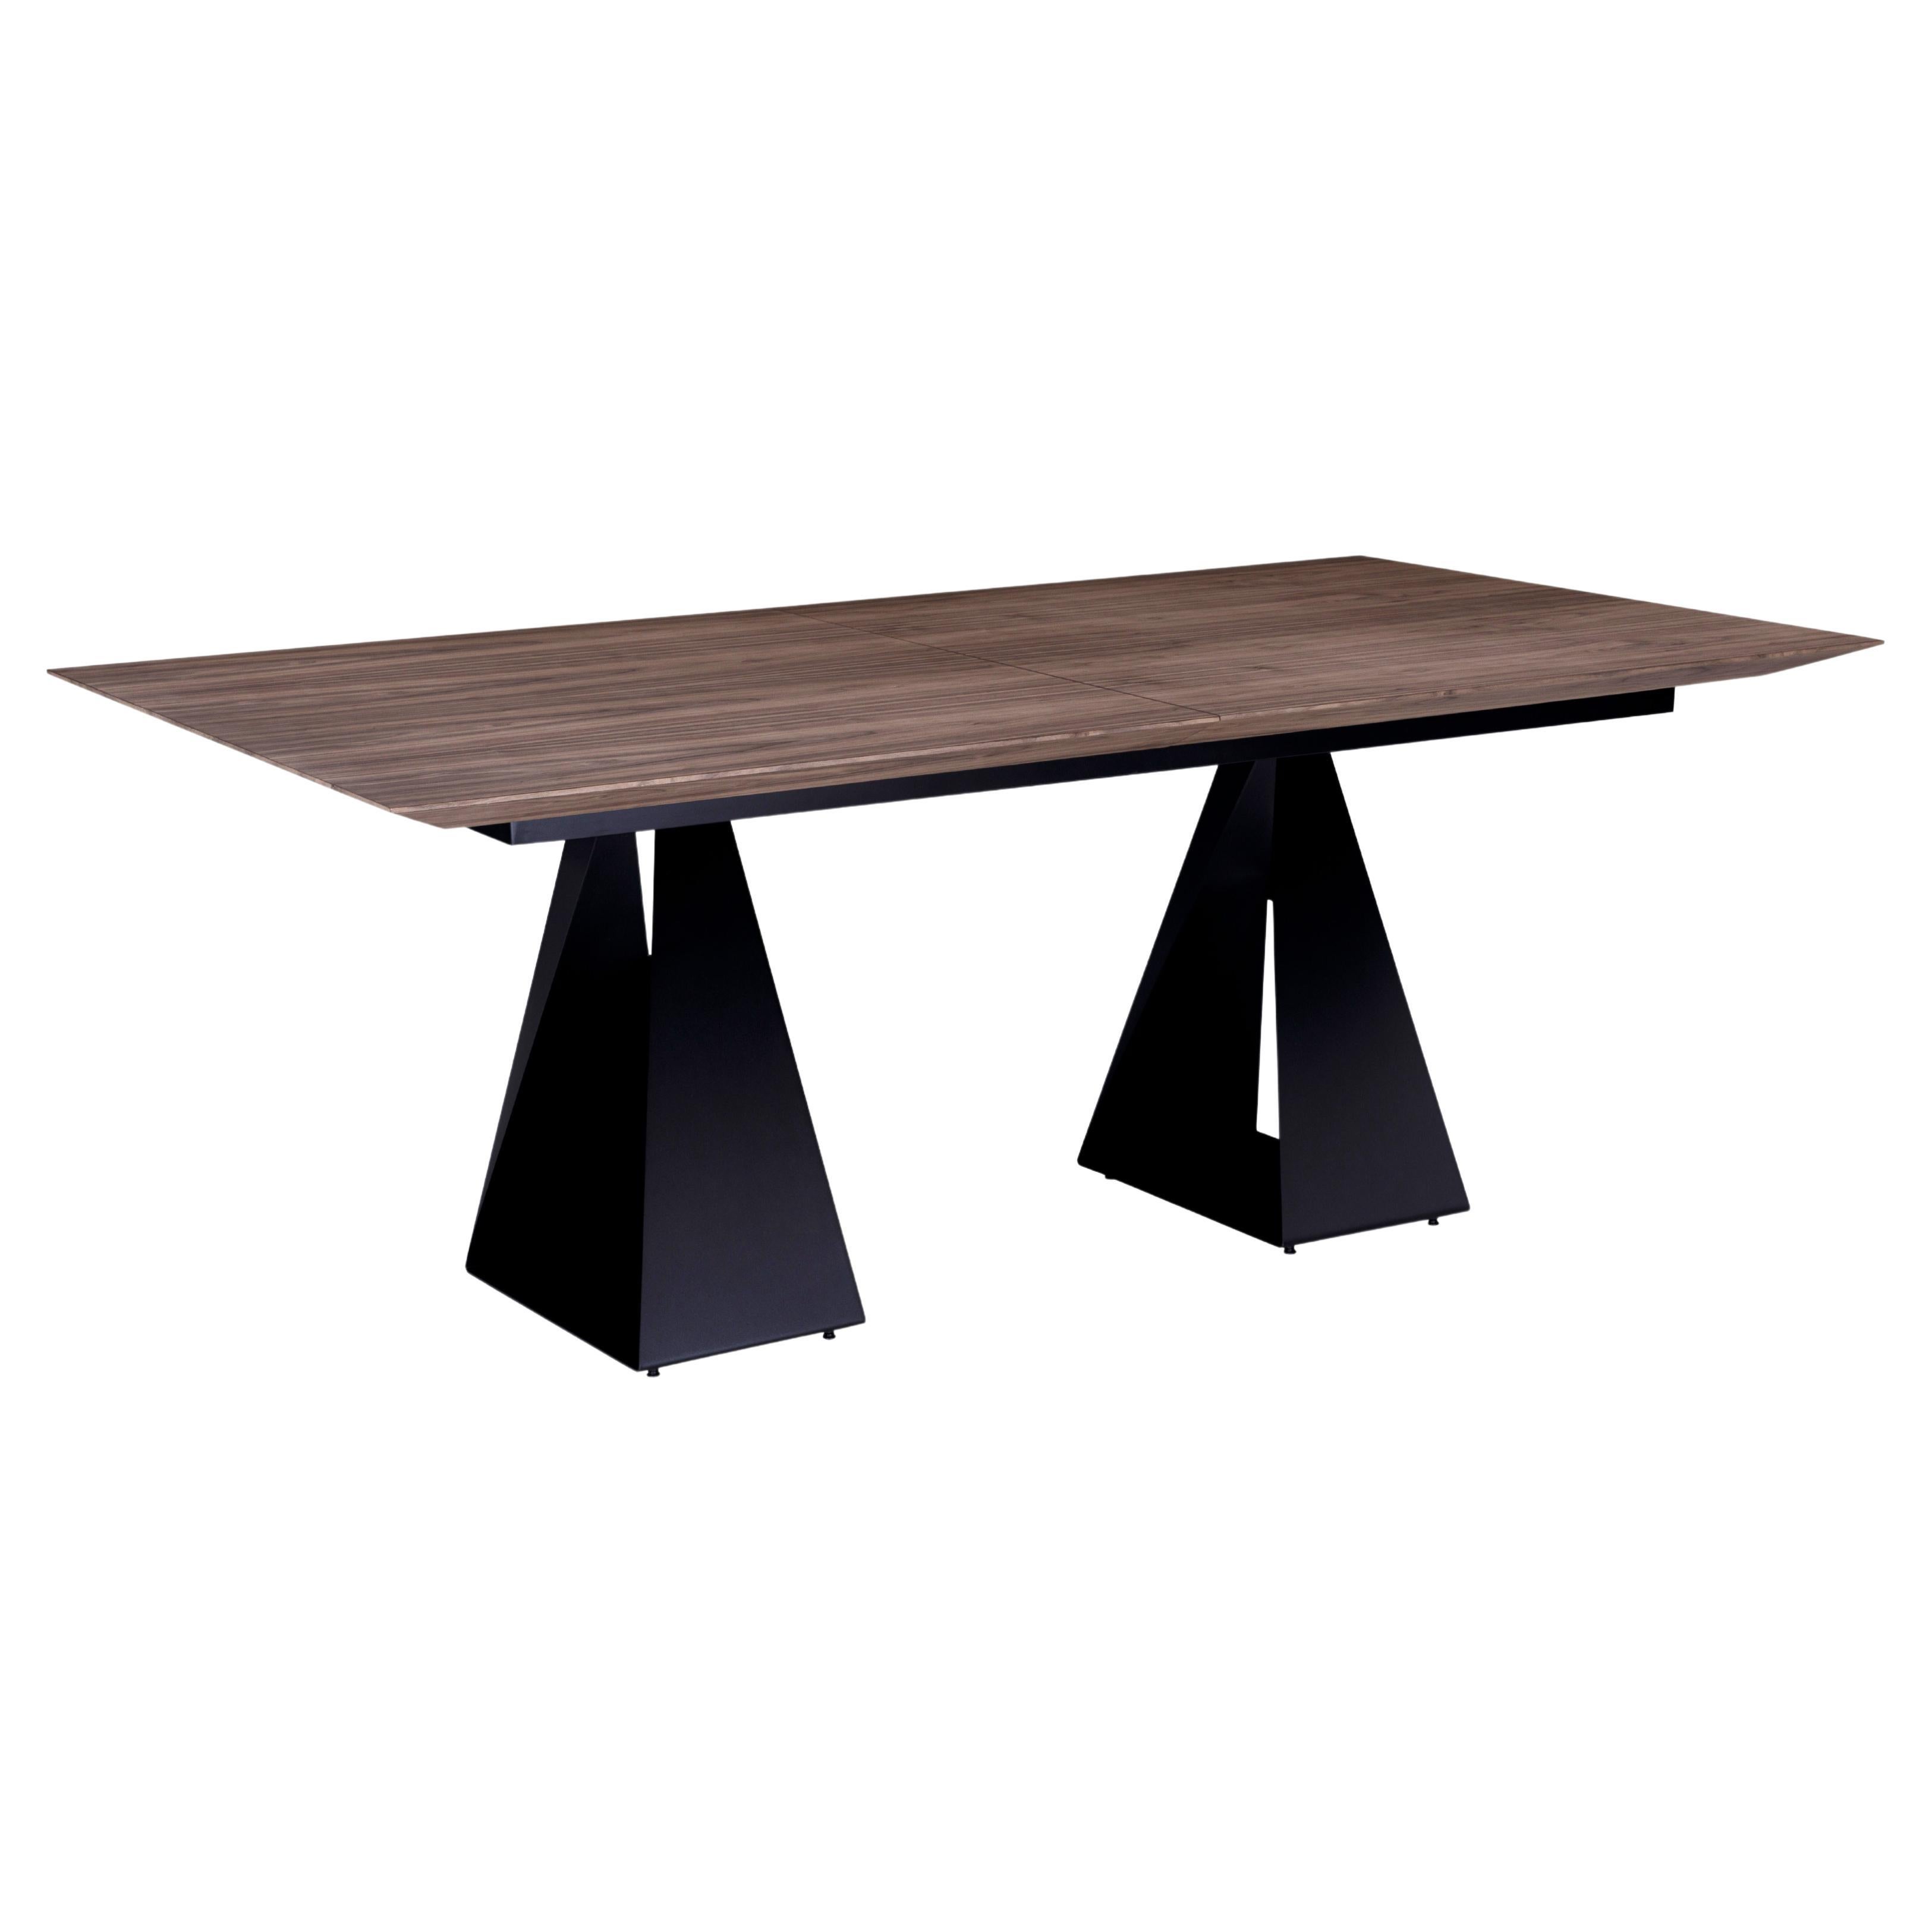 Cronos Extendable Dining Table with a Walnut Wood Finish Top and Metal Legs 79''